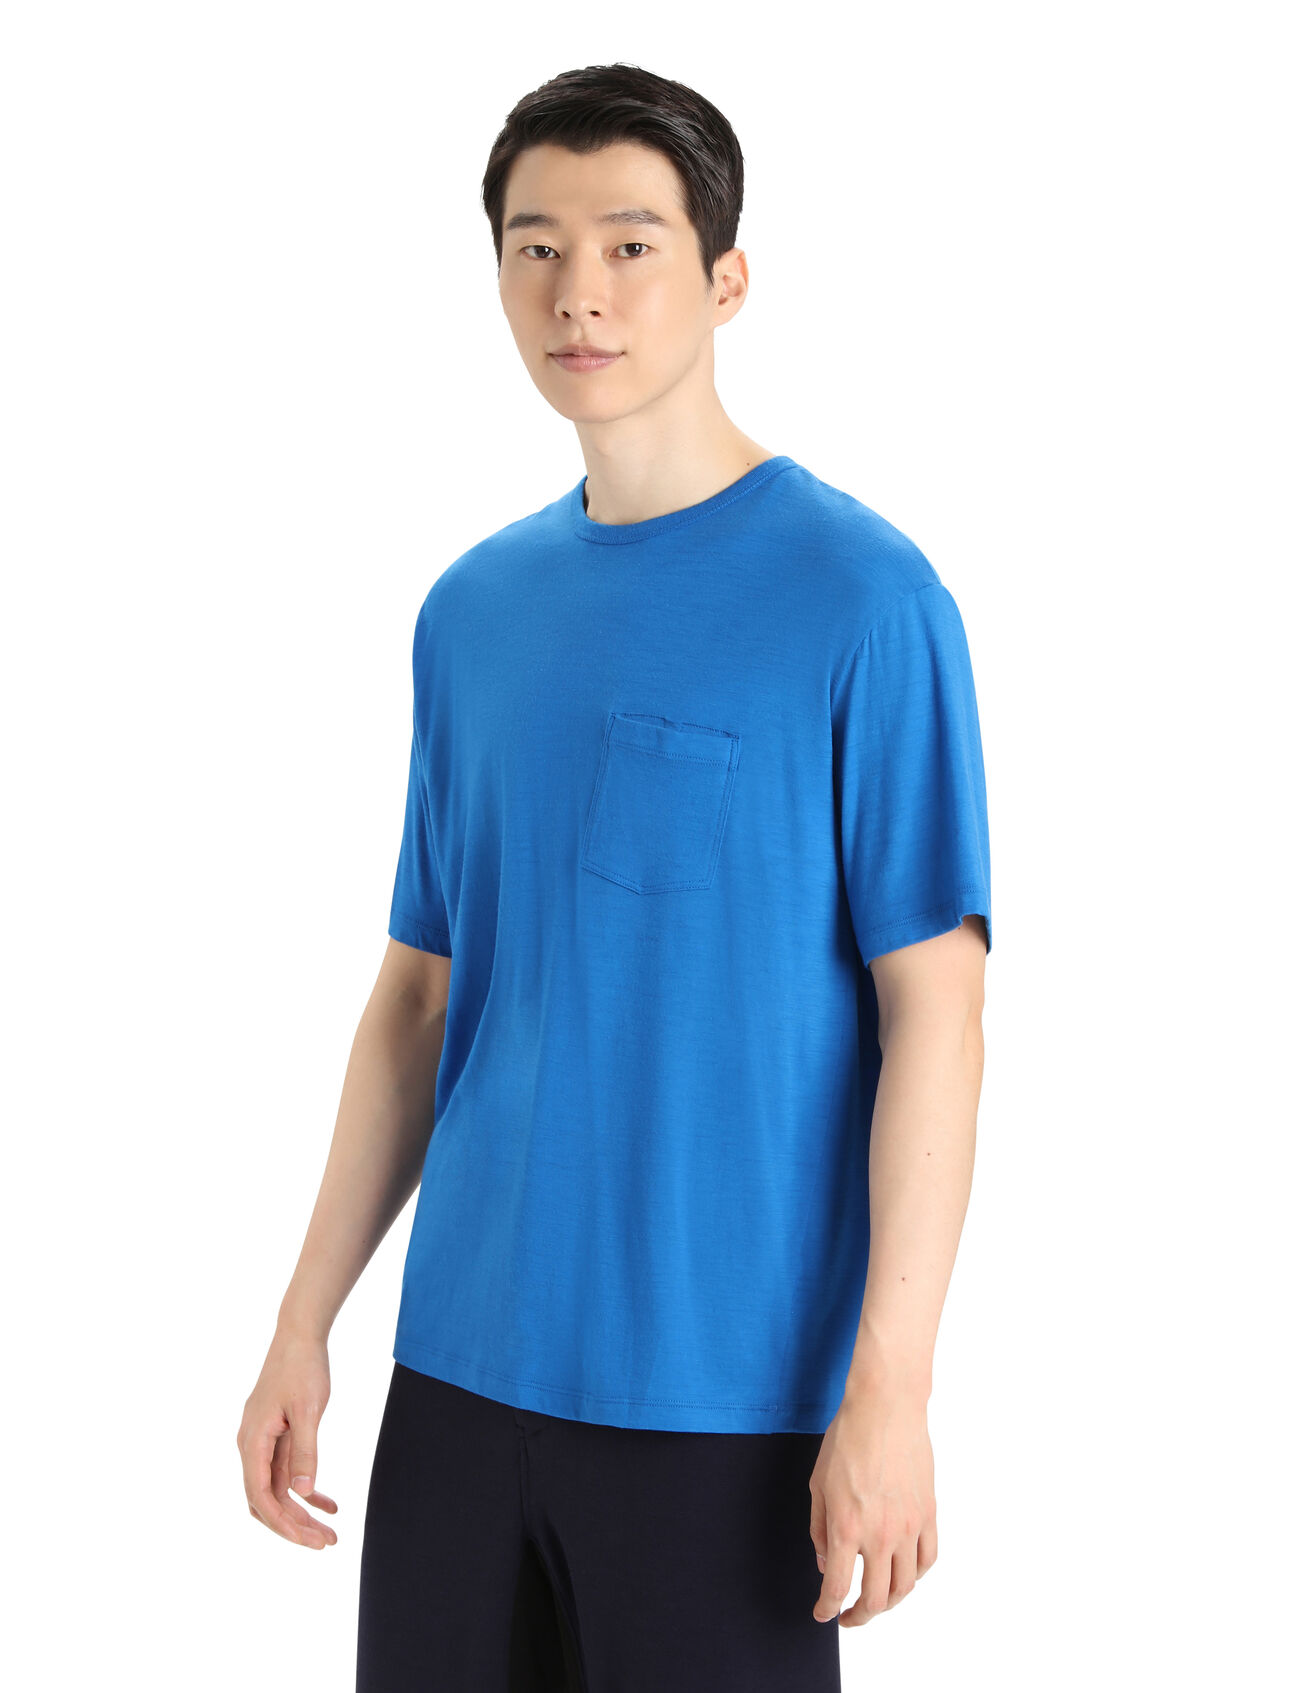 Mens Merino Granary Short Sleeve Pocket Tee A classic pocket tee with a relaxed fit and soft, breathable, 100% merino wool fabric, the Granary Short Sleeve Pocket Tee is all about everyday comfort and style.